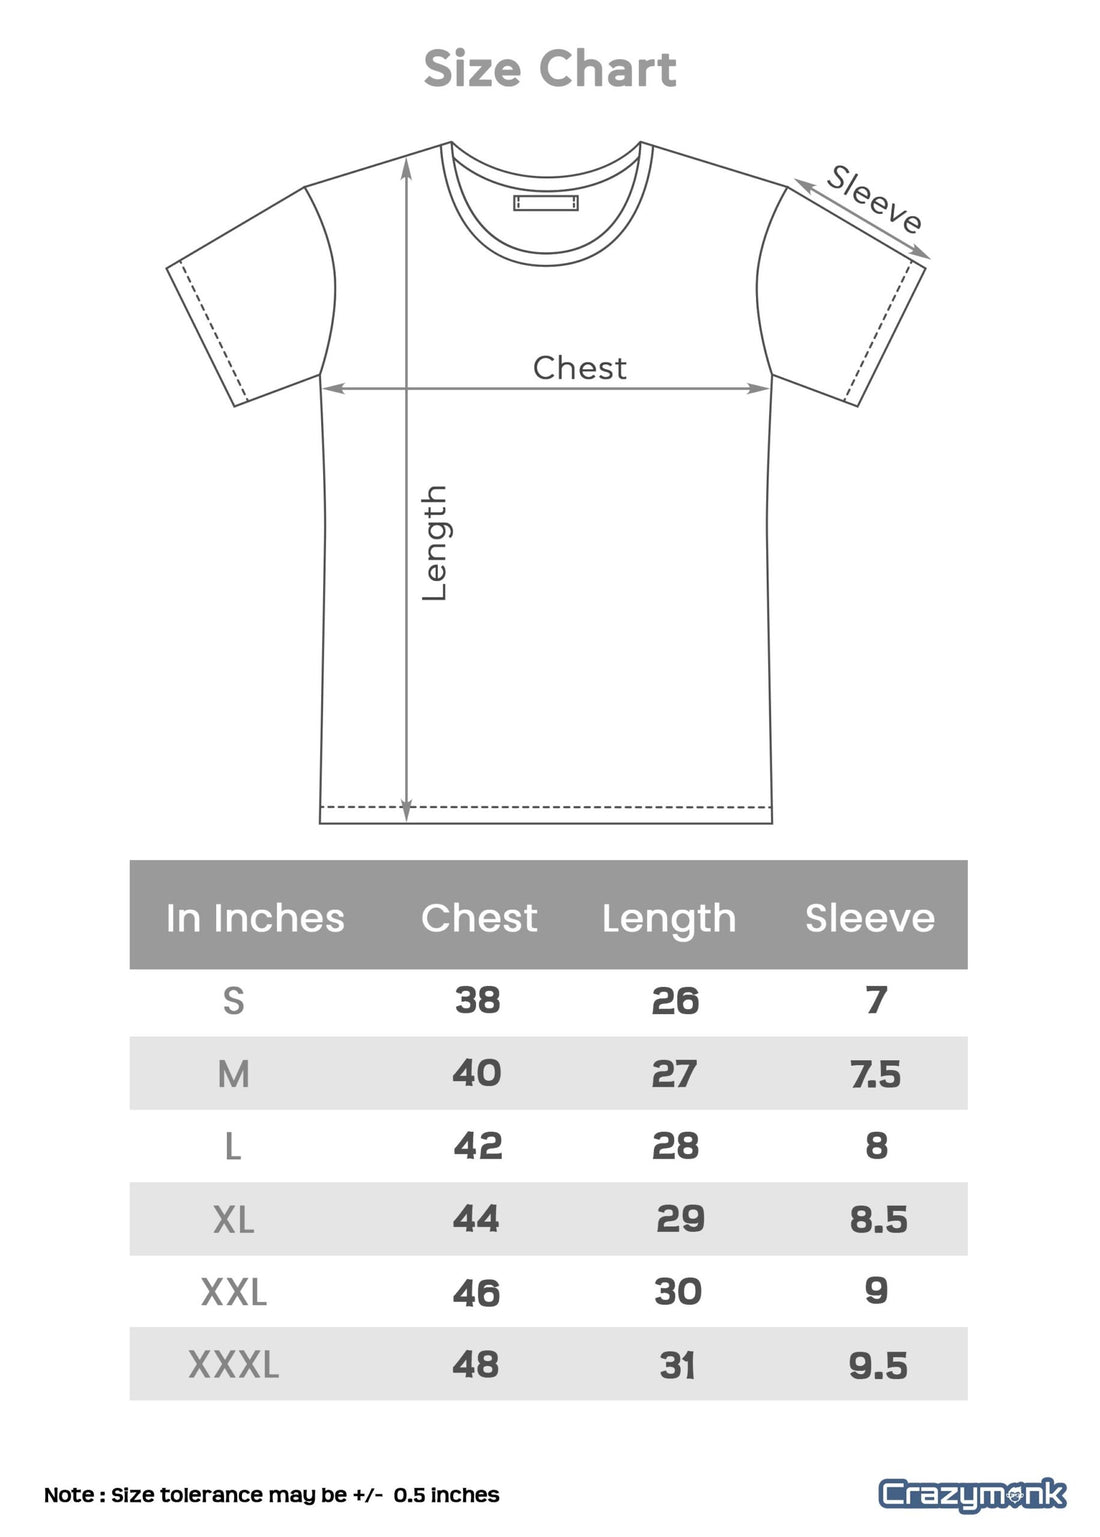 Select Girls Where Age Between 18 to 24 Half Sleeve T-Shirt